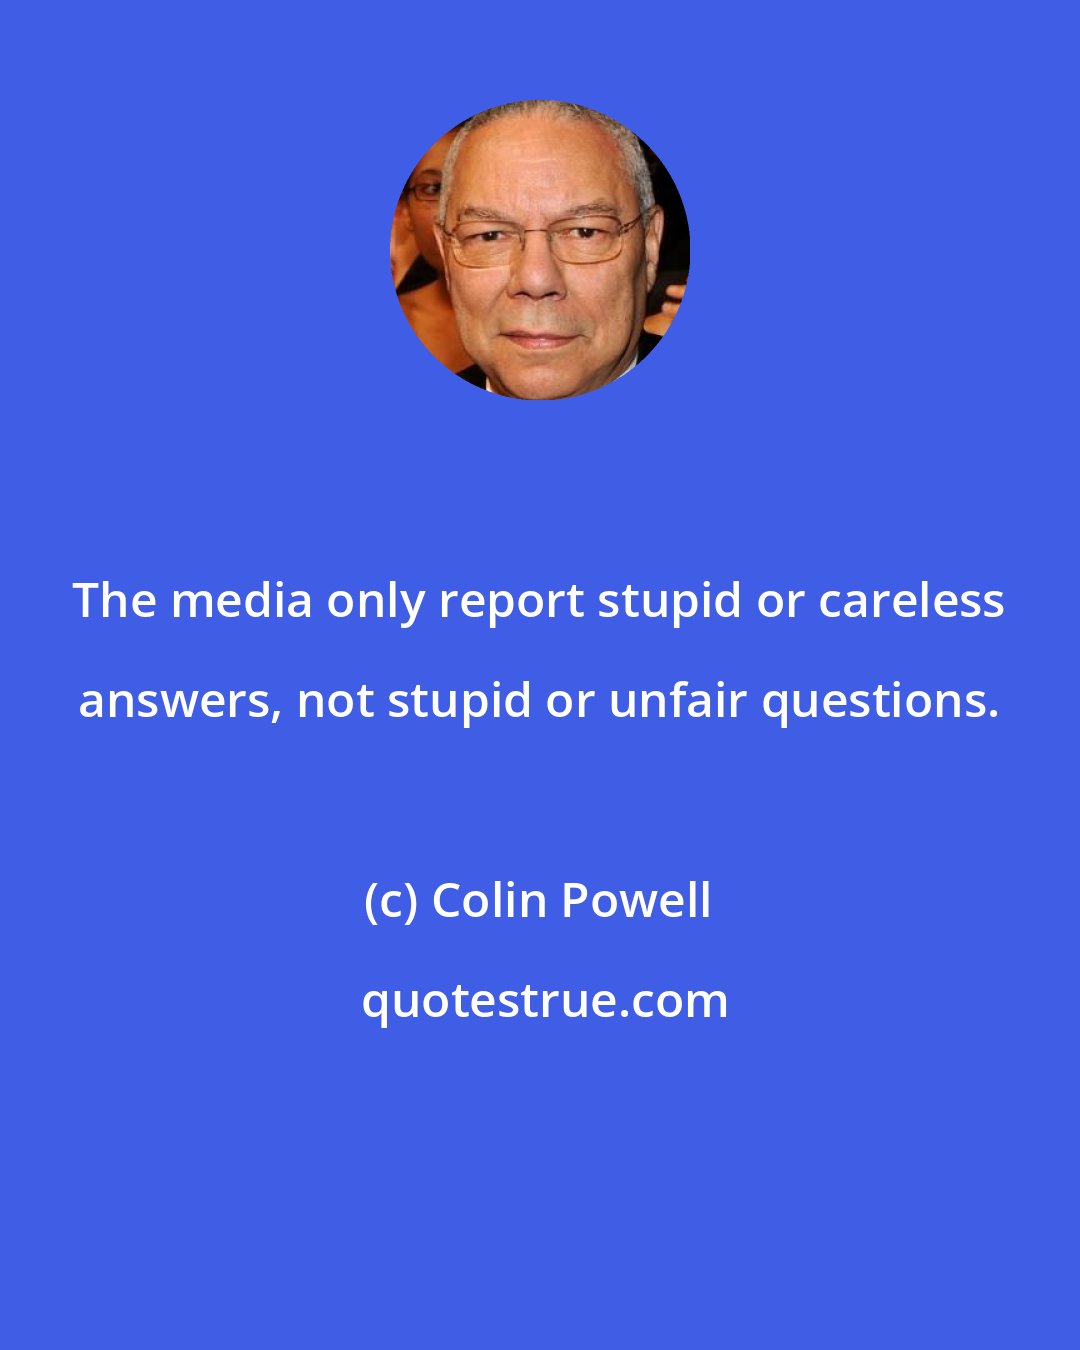 Colin Powell: The media only report stupid or careless answers, not stupid or unfair questions.